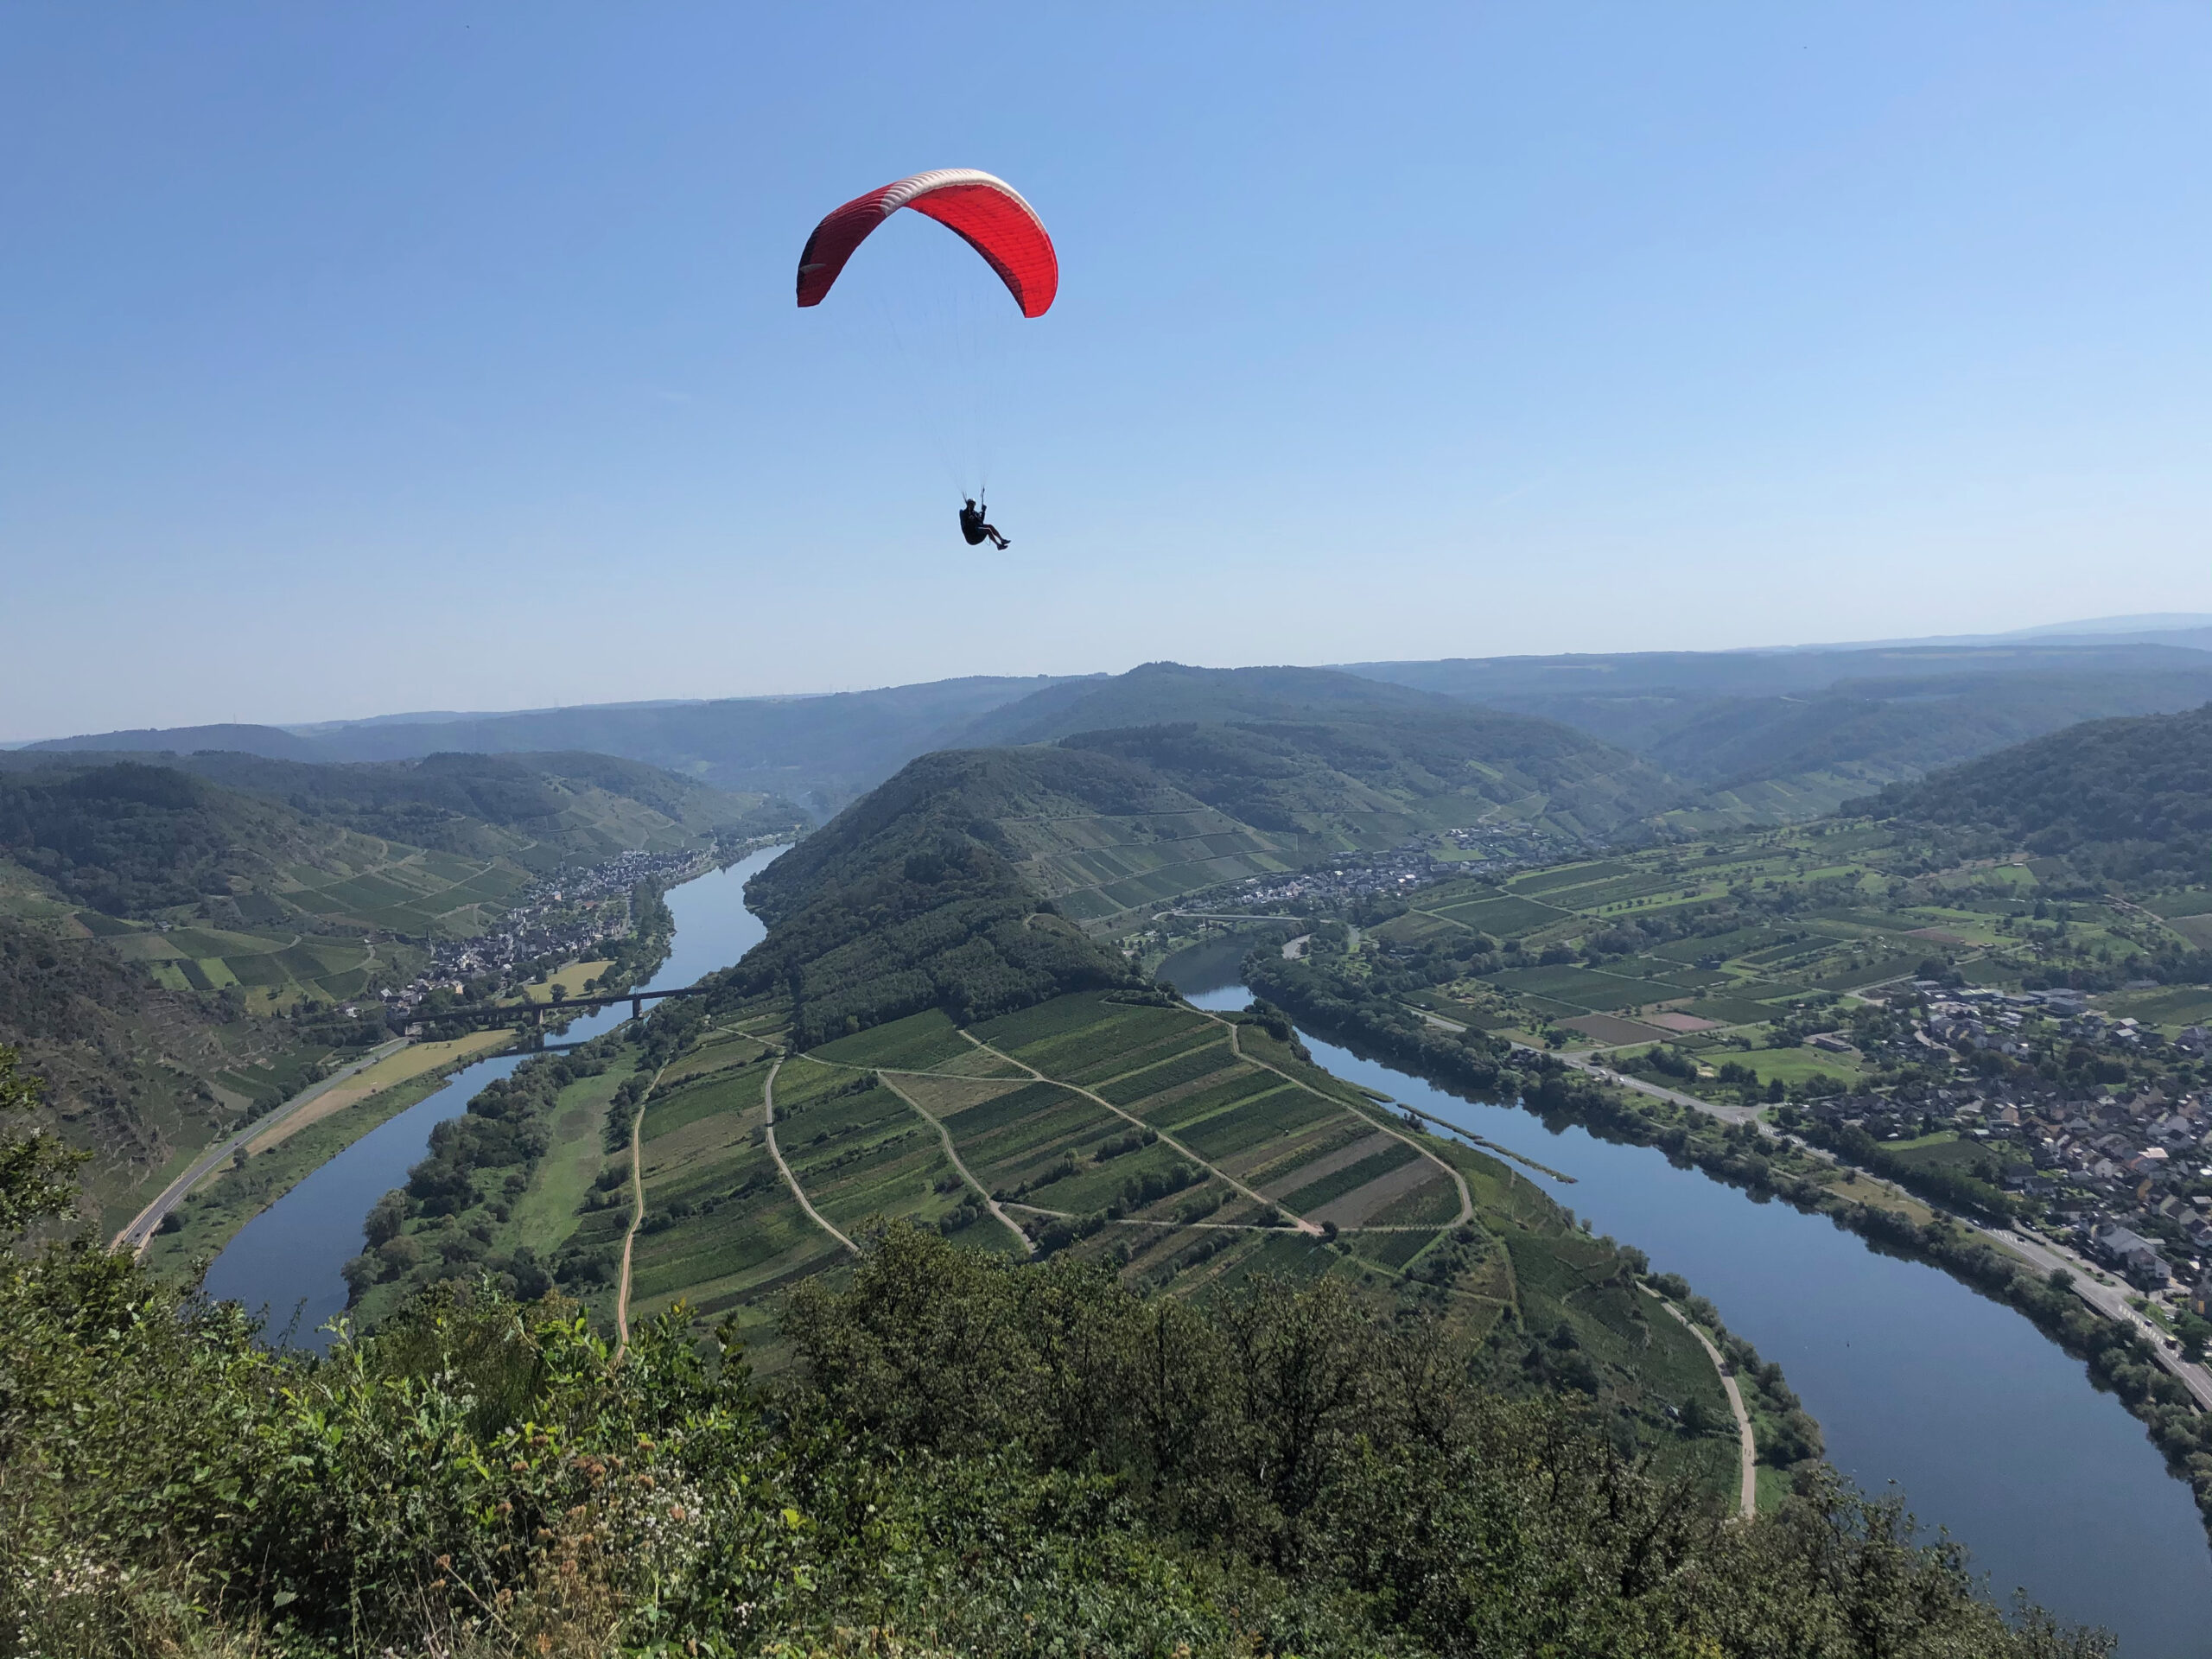 Hang Glider soars above the Mosel river and grapevines in the Bremmer Calmont Vineyard